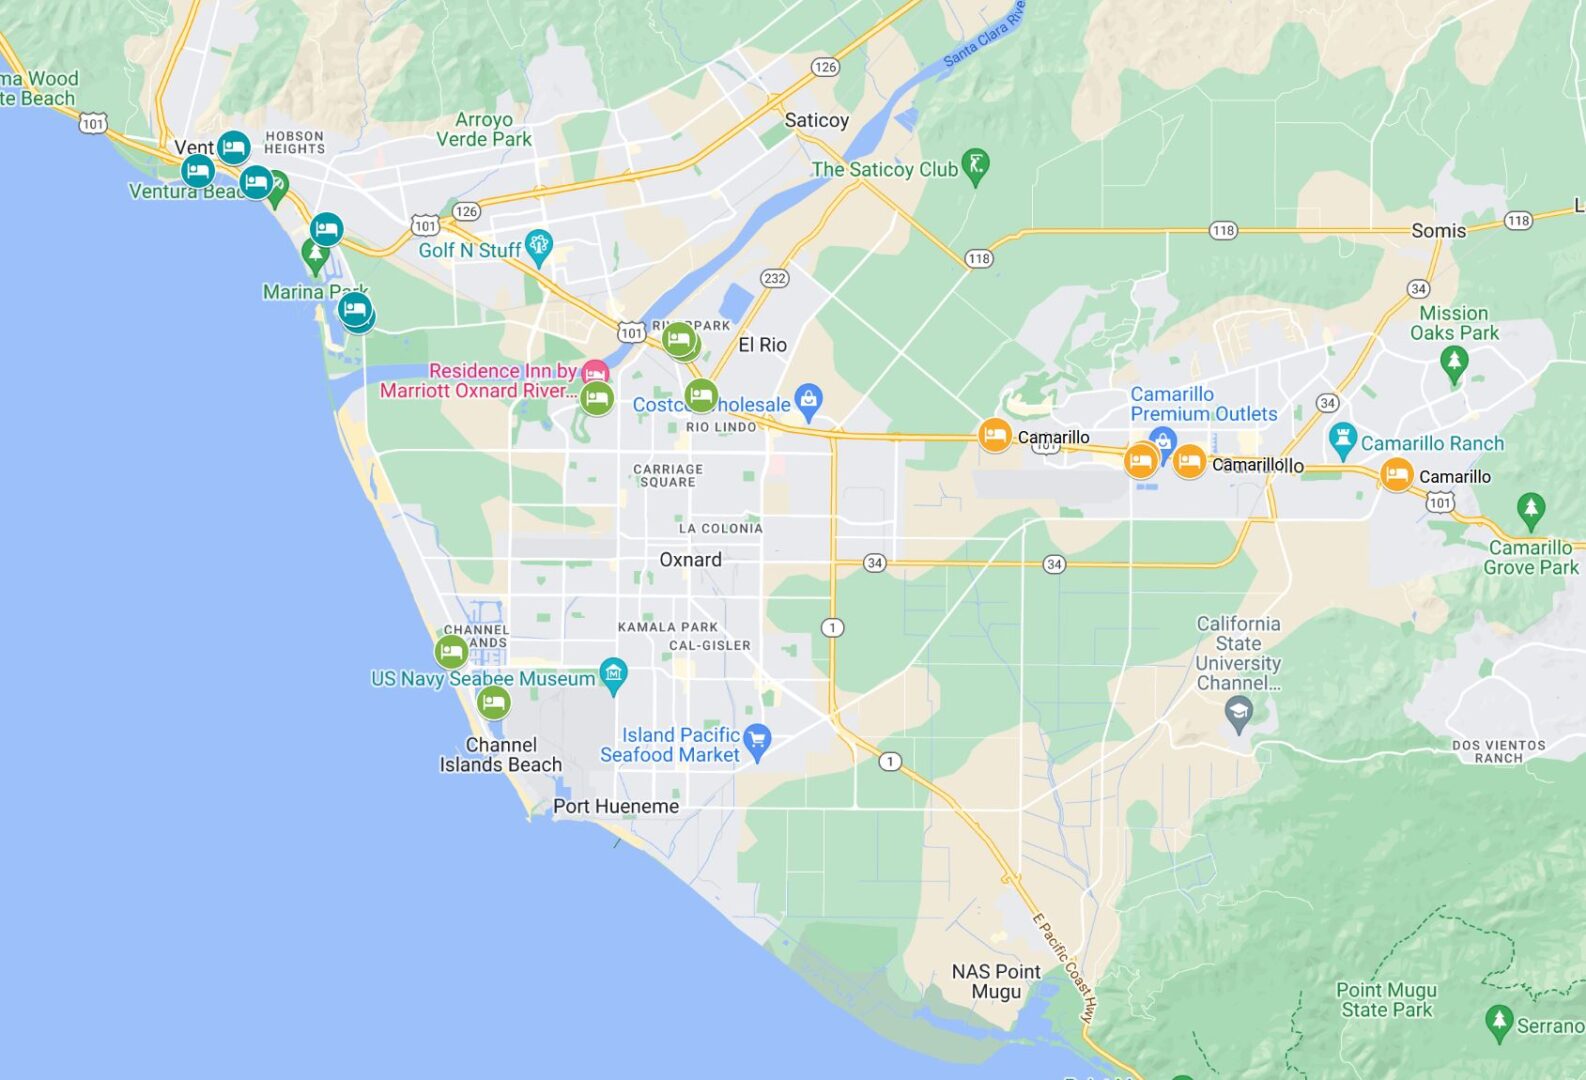 New Hotels and Renovations in Ventura County.